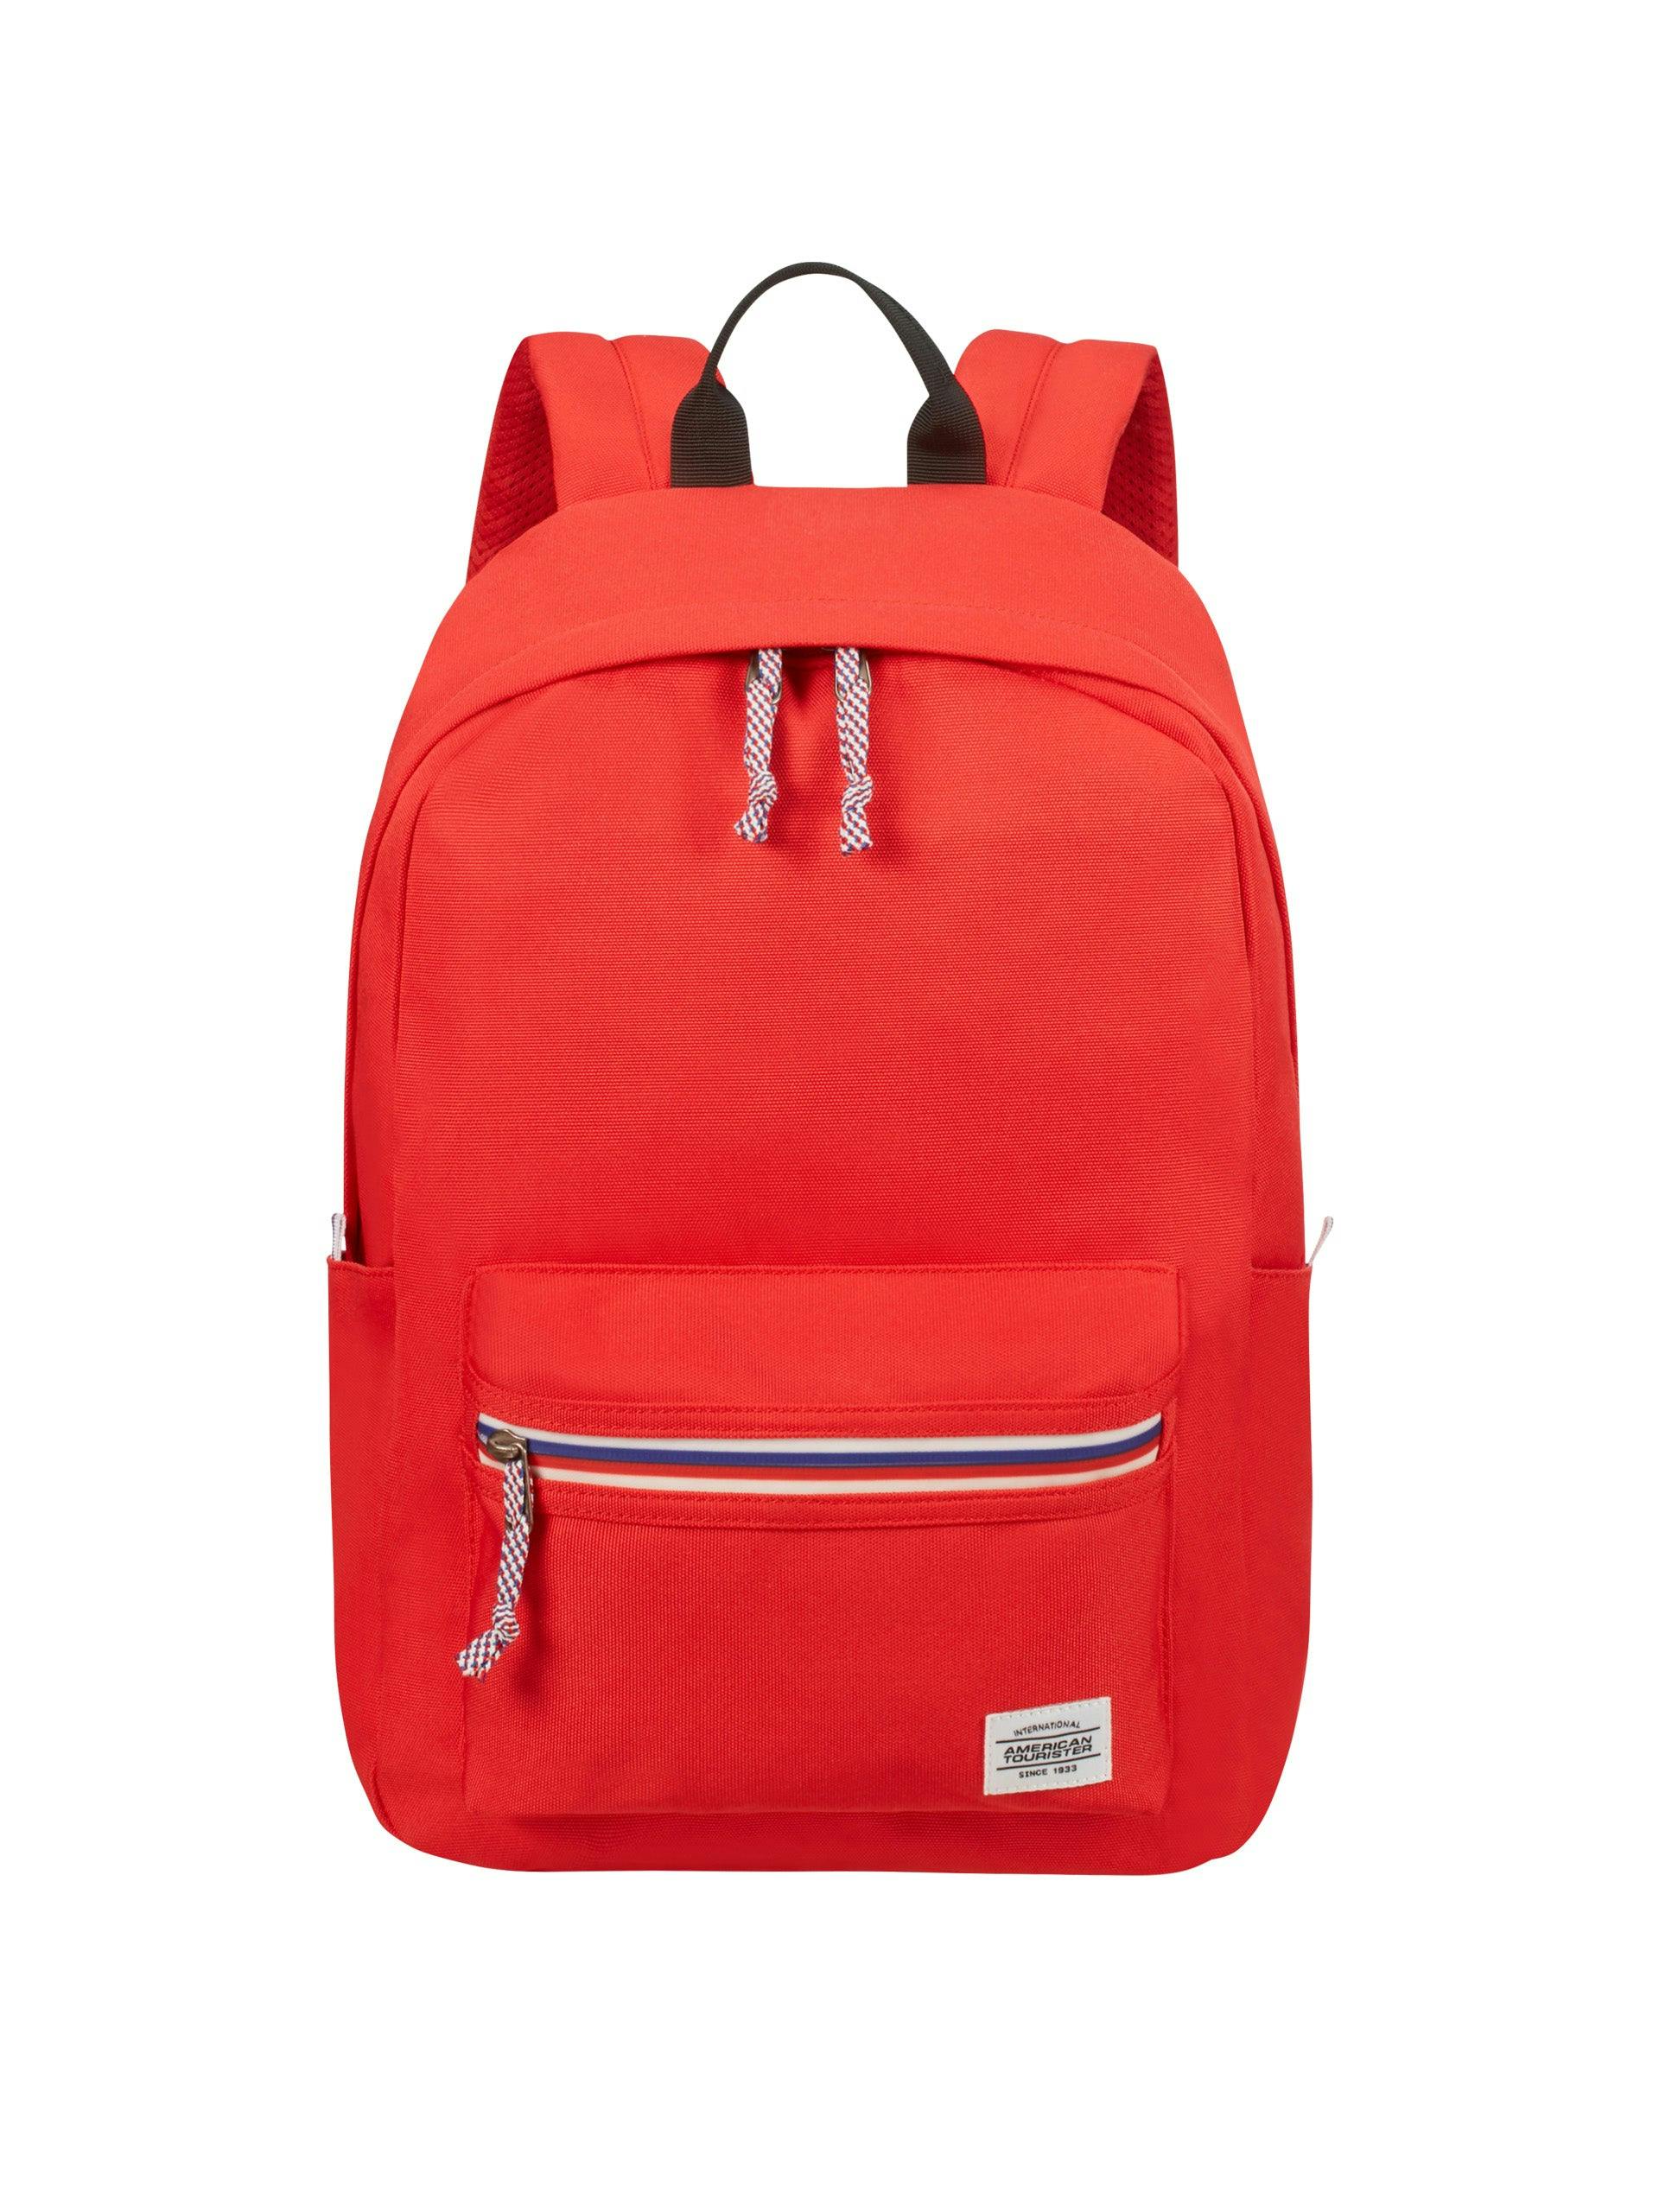 American Tourister Upbeat backpack